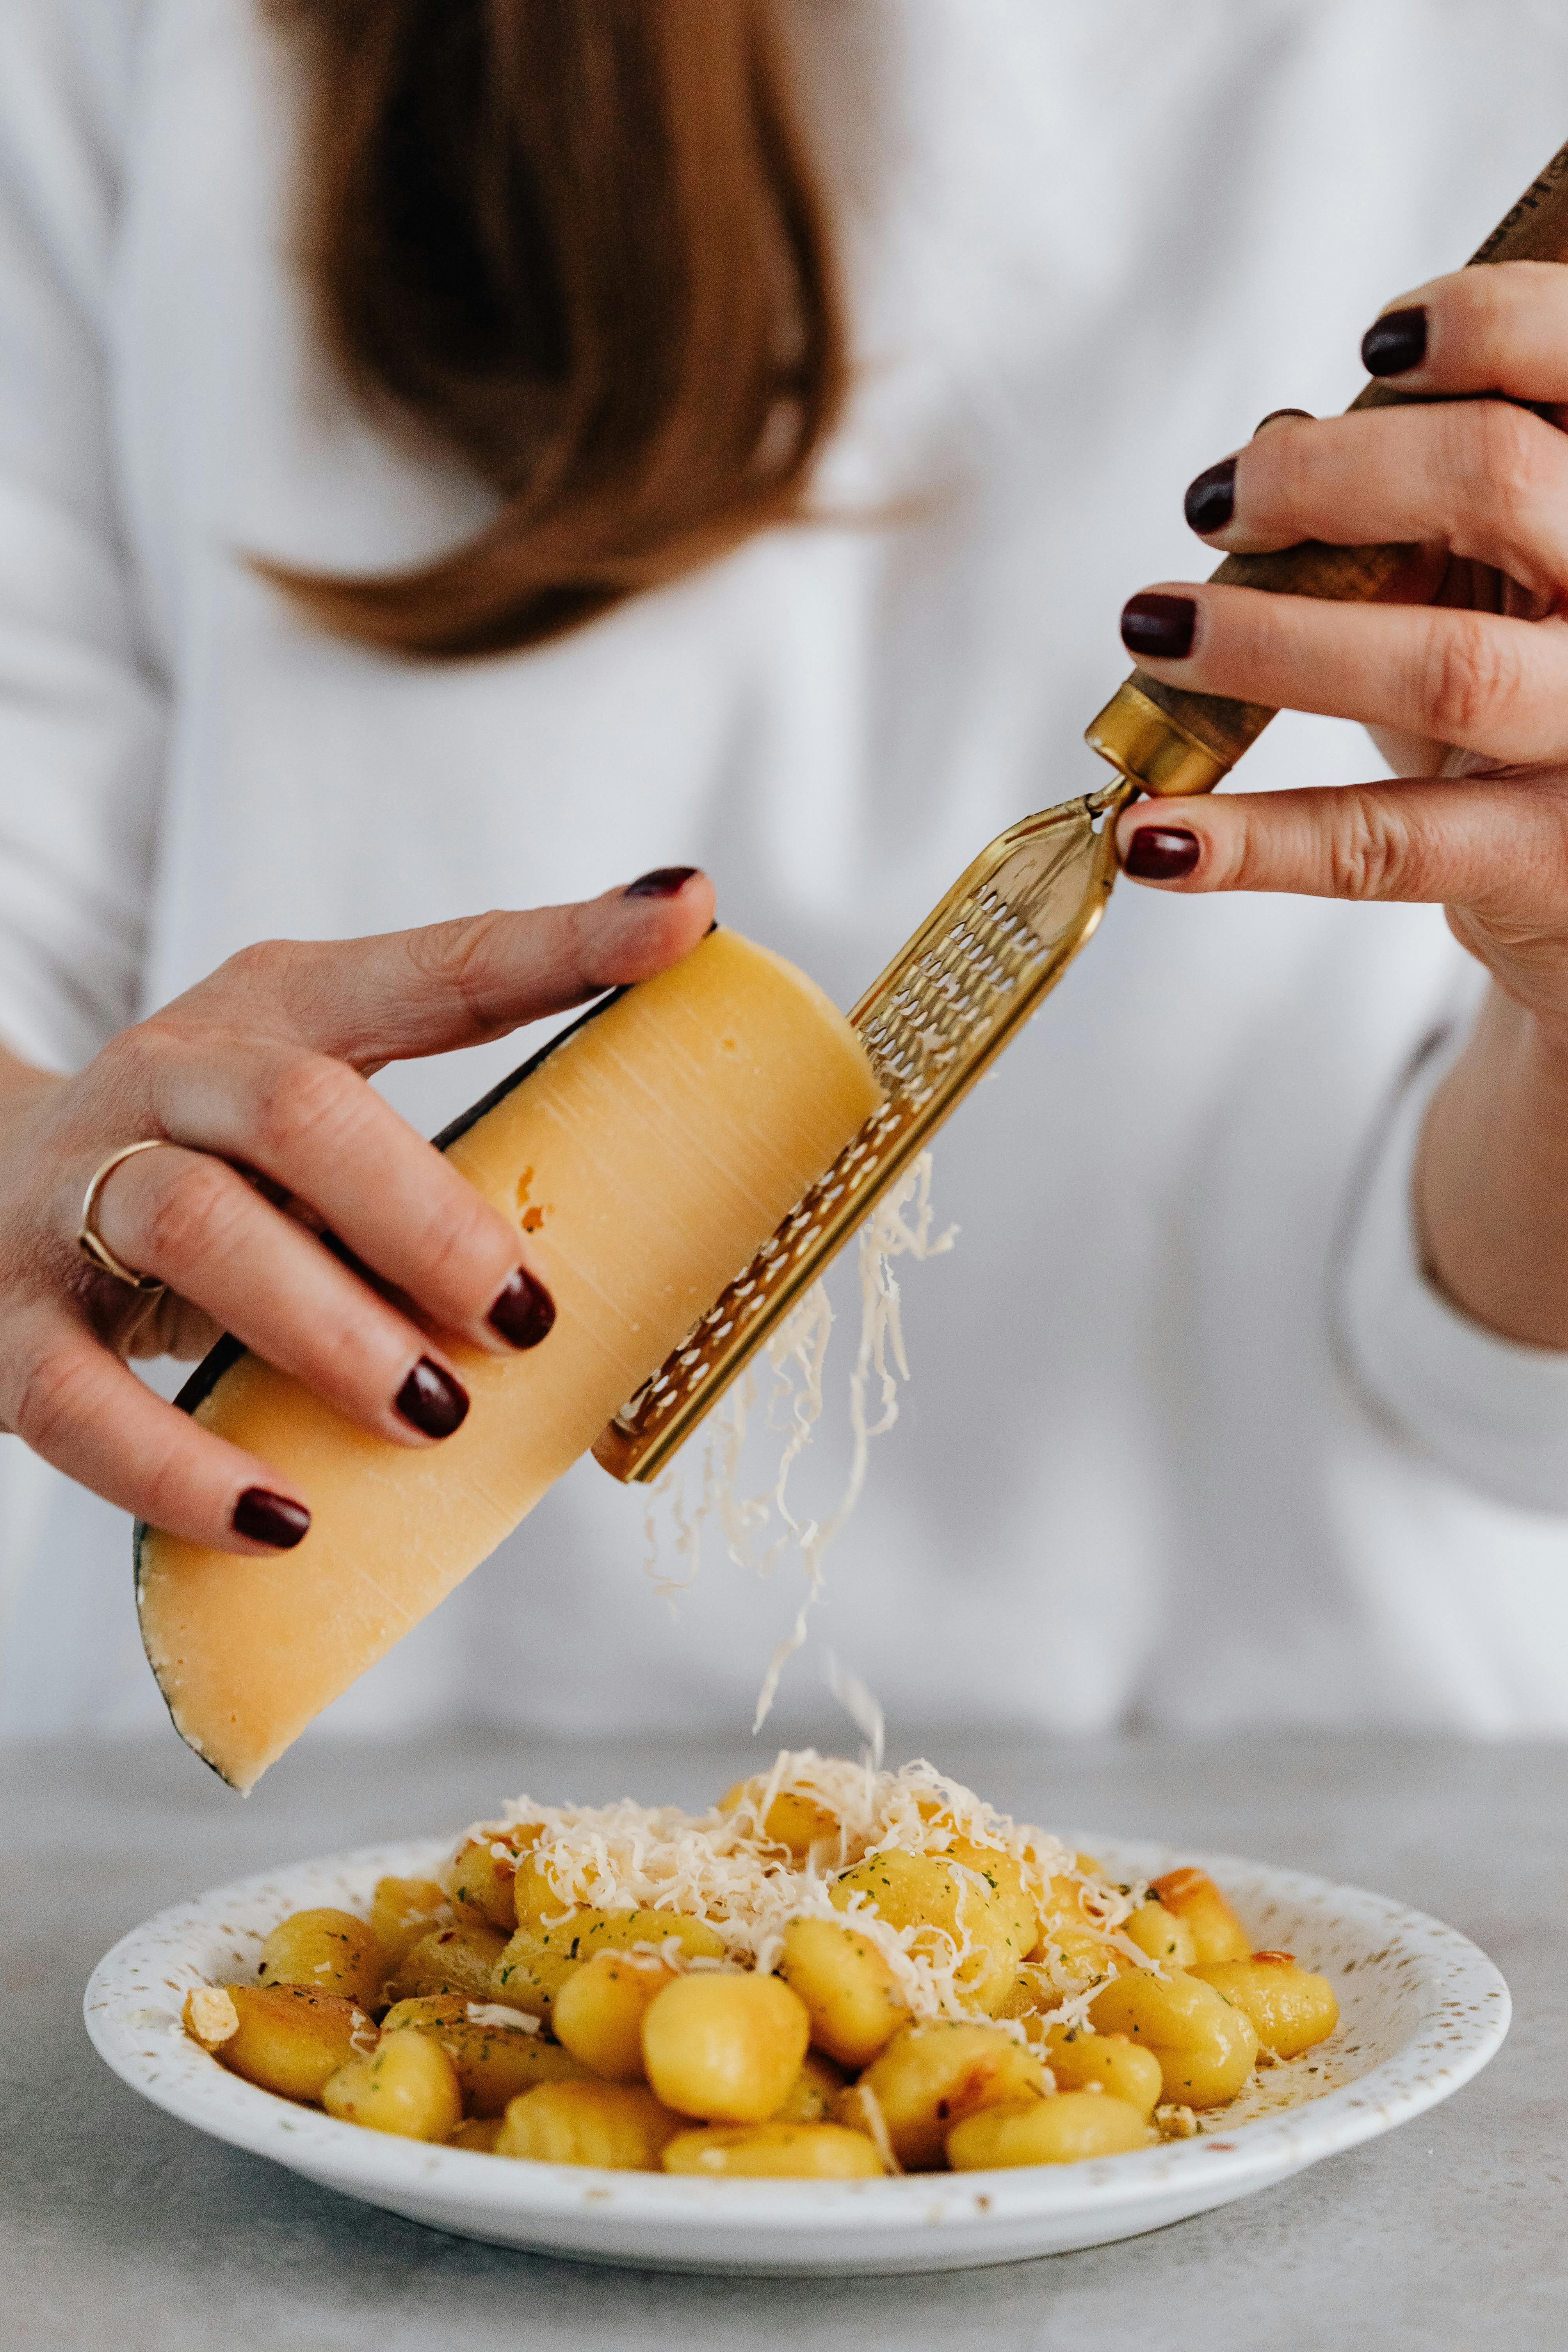 Pink Handheld Food Grater Stock Image Stock Photo - Download Image Now -  Abstract, Cheese Grater, Close-up - iStock